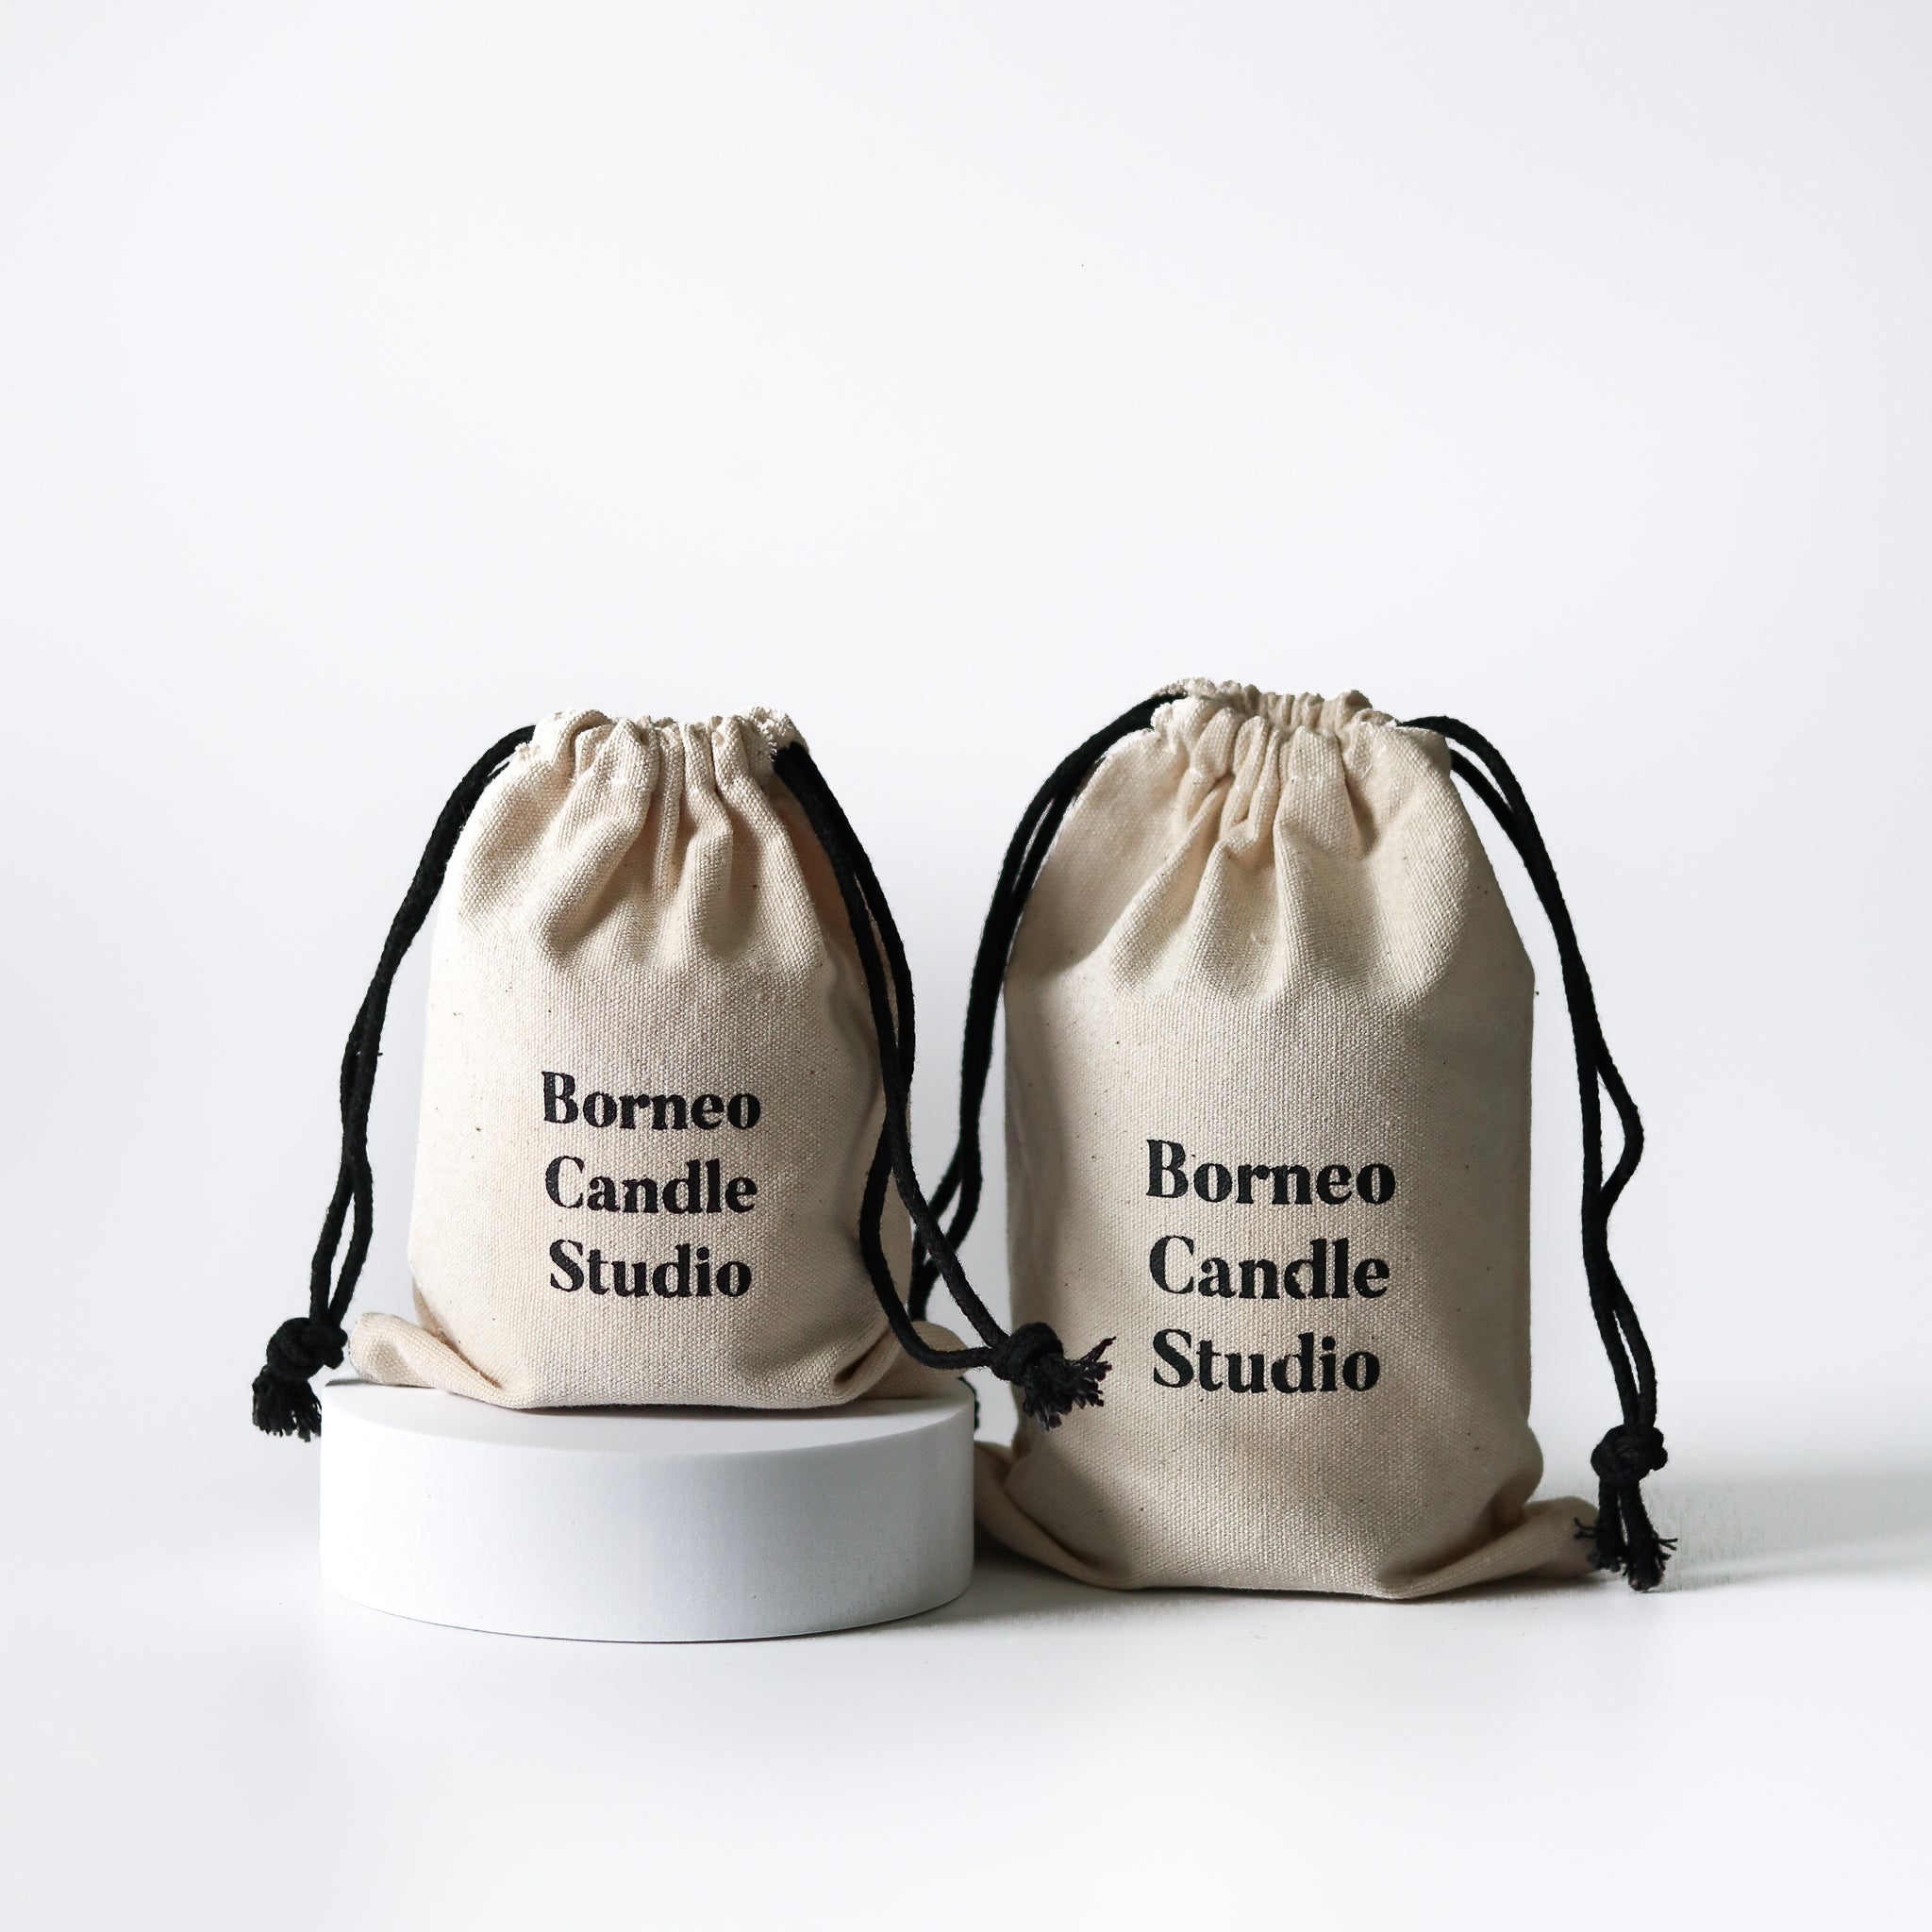 Borneo Candle Studio Product Packaging Cotton Pouch